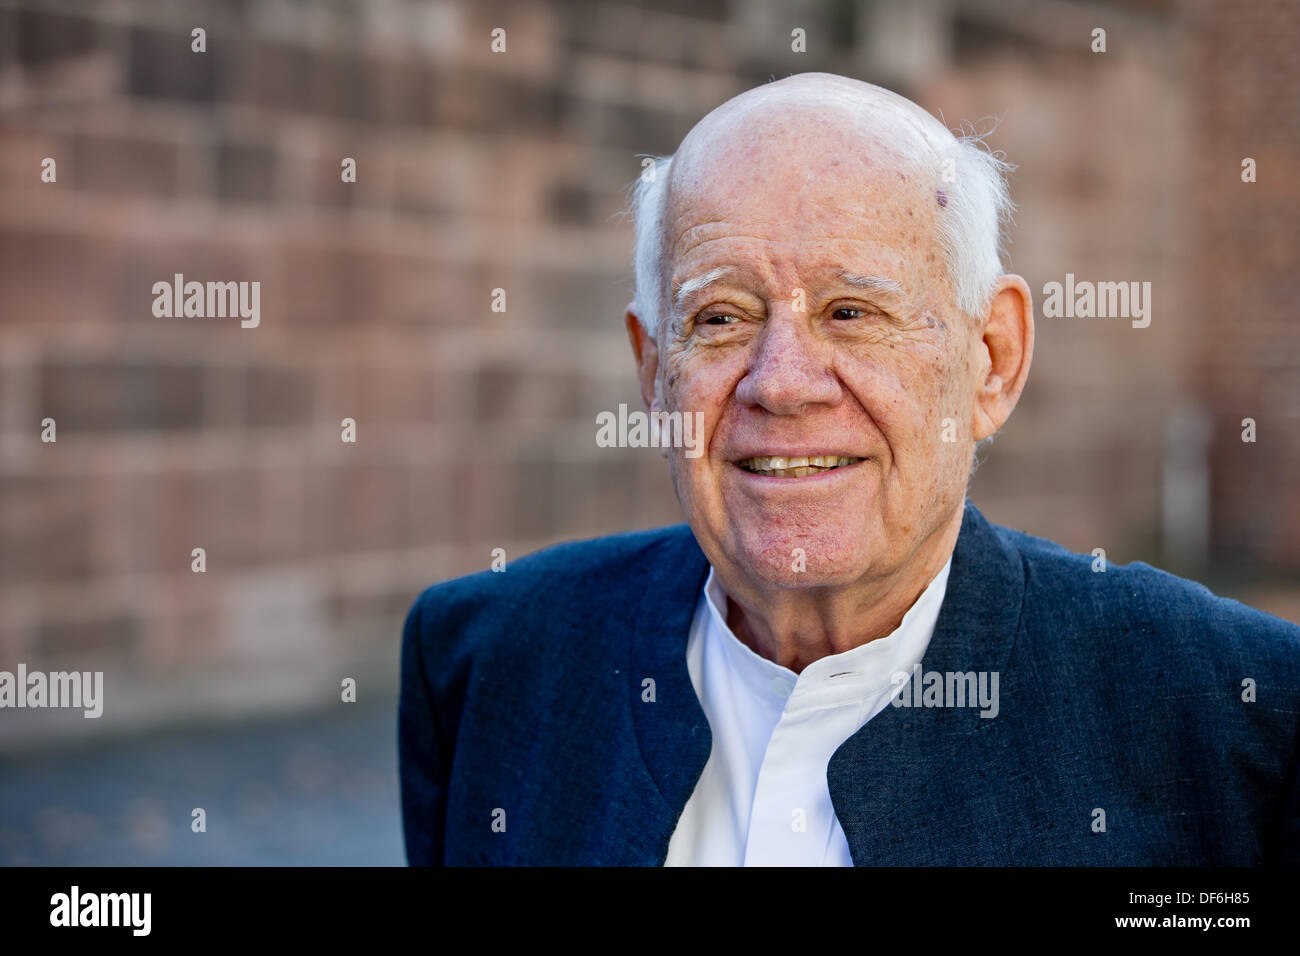 Nuremberg, Germany. 29th Sep, 2013. Israeli sculptor Dani Karavan in Nuremberg, Germany, 29 September 2013. He is known for his site specific monuments lik the Heinrich-Boell-Platz in Cologne of the "Street of Human Rights". Photo: DANIEL KARMANN/dpa/Alamy Live News Stock Photo